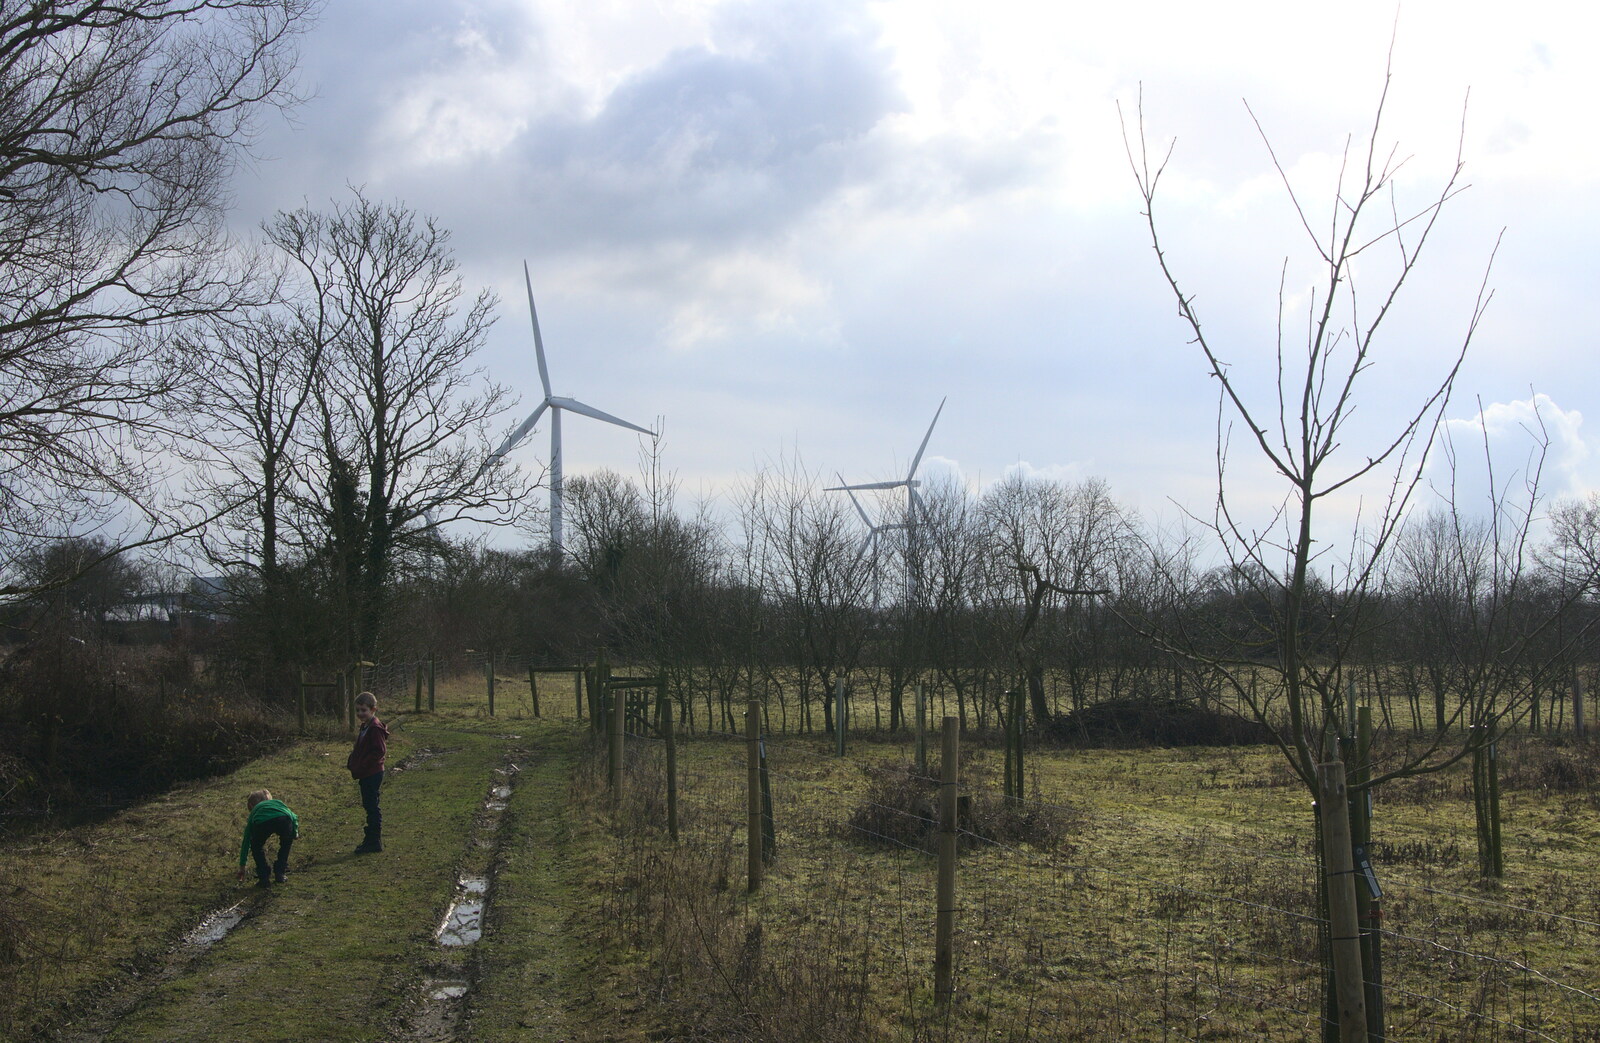 The boys and the wind turbines from A Winter's Walk, Thrandeston, Suffolk - 5th February 2017